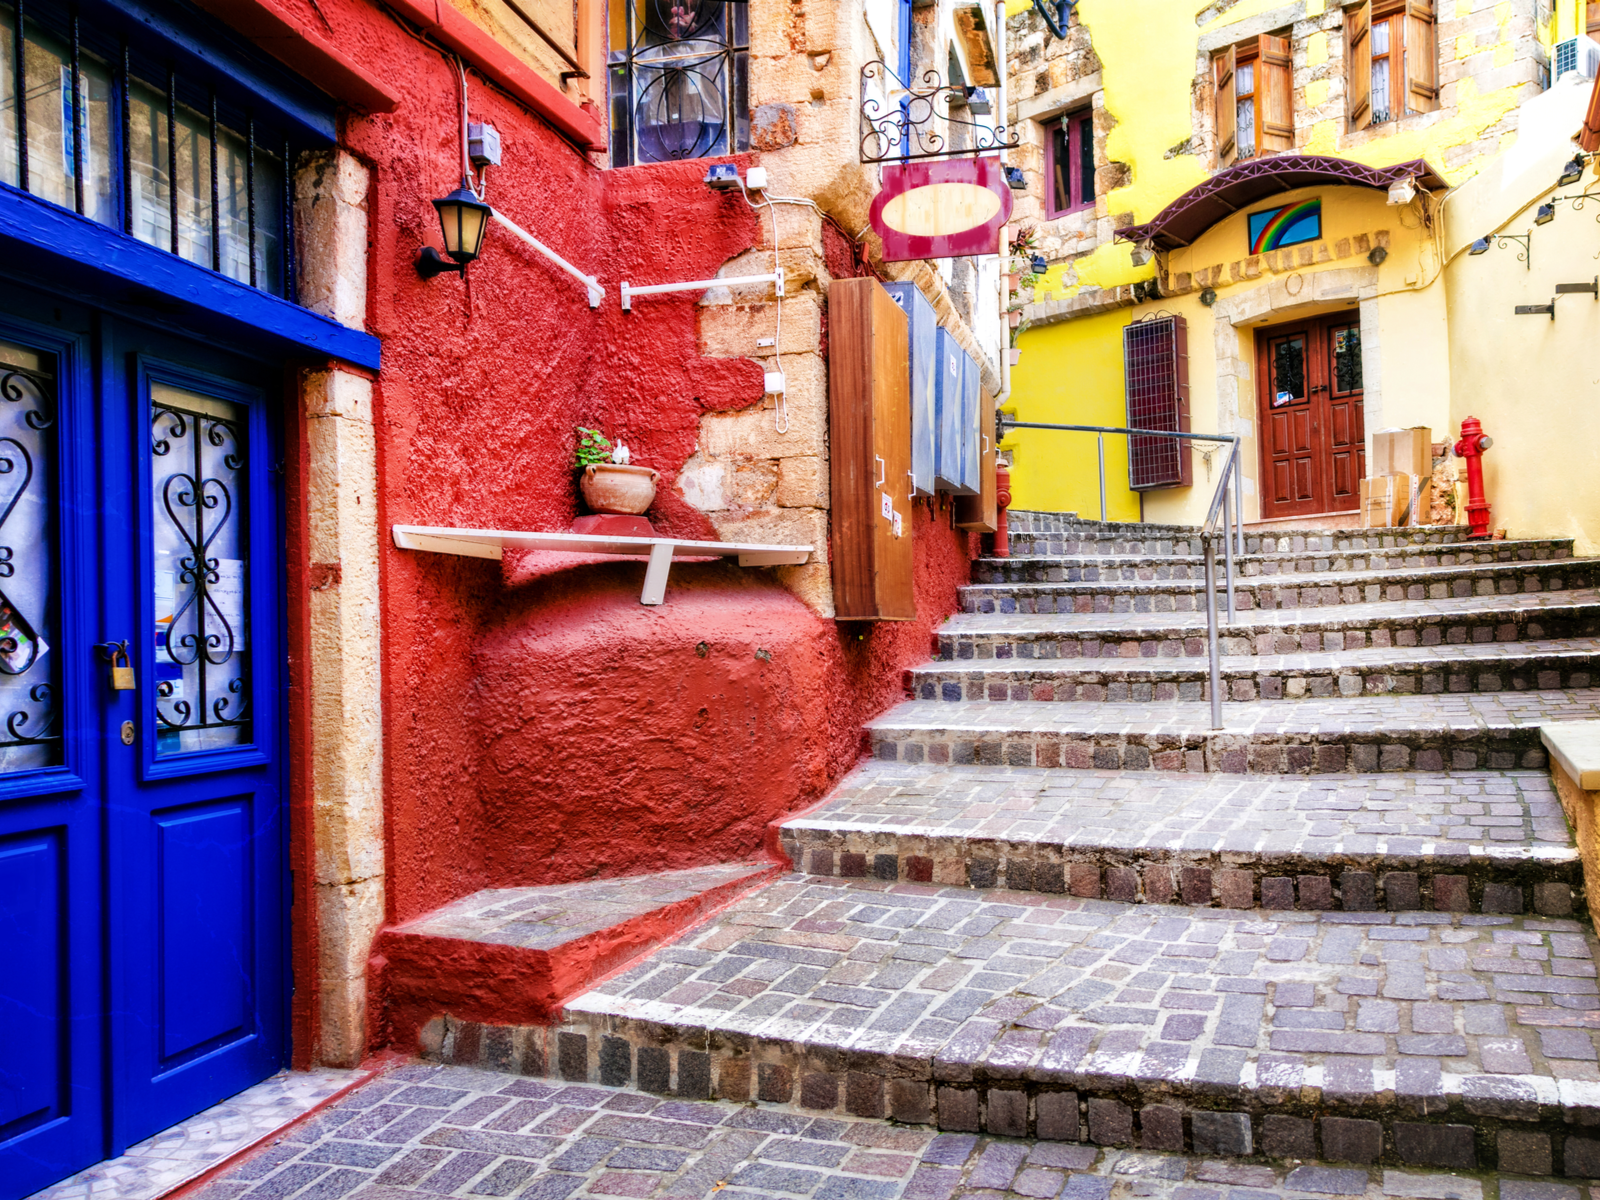 Lots of cool and vibrant colors in one of the best things to do in Greece, Crete